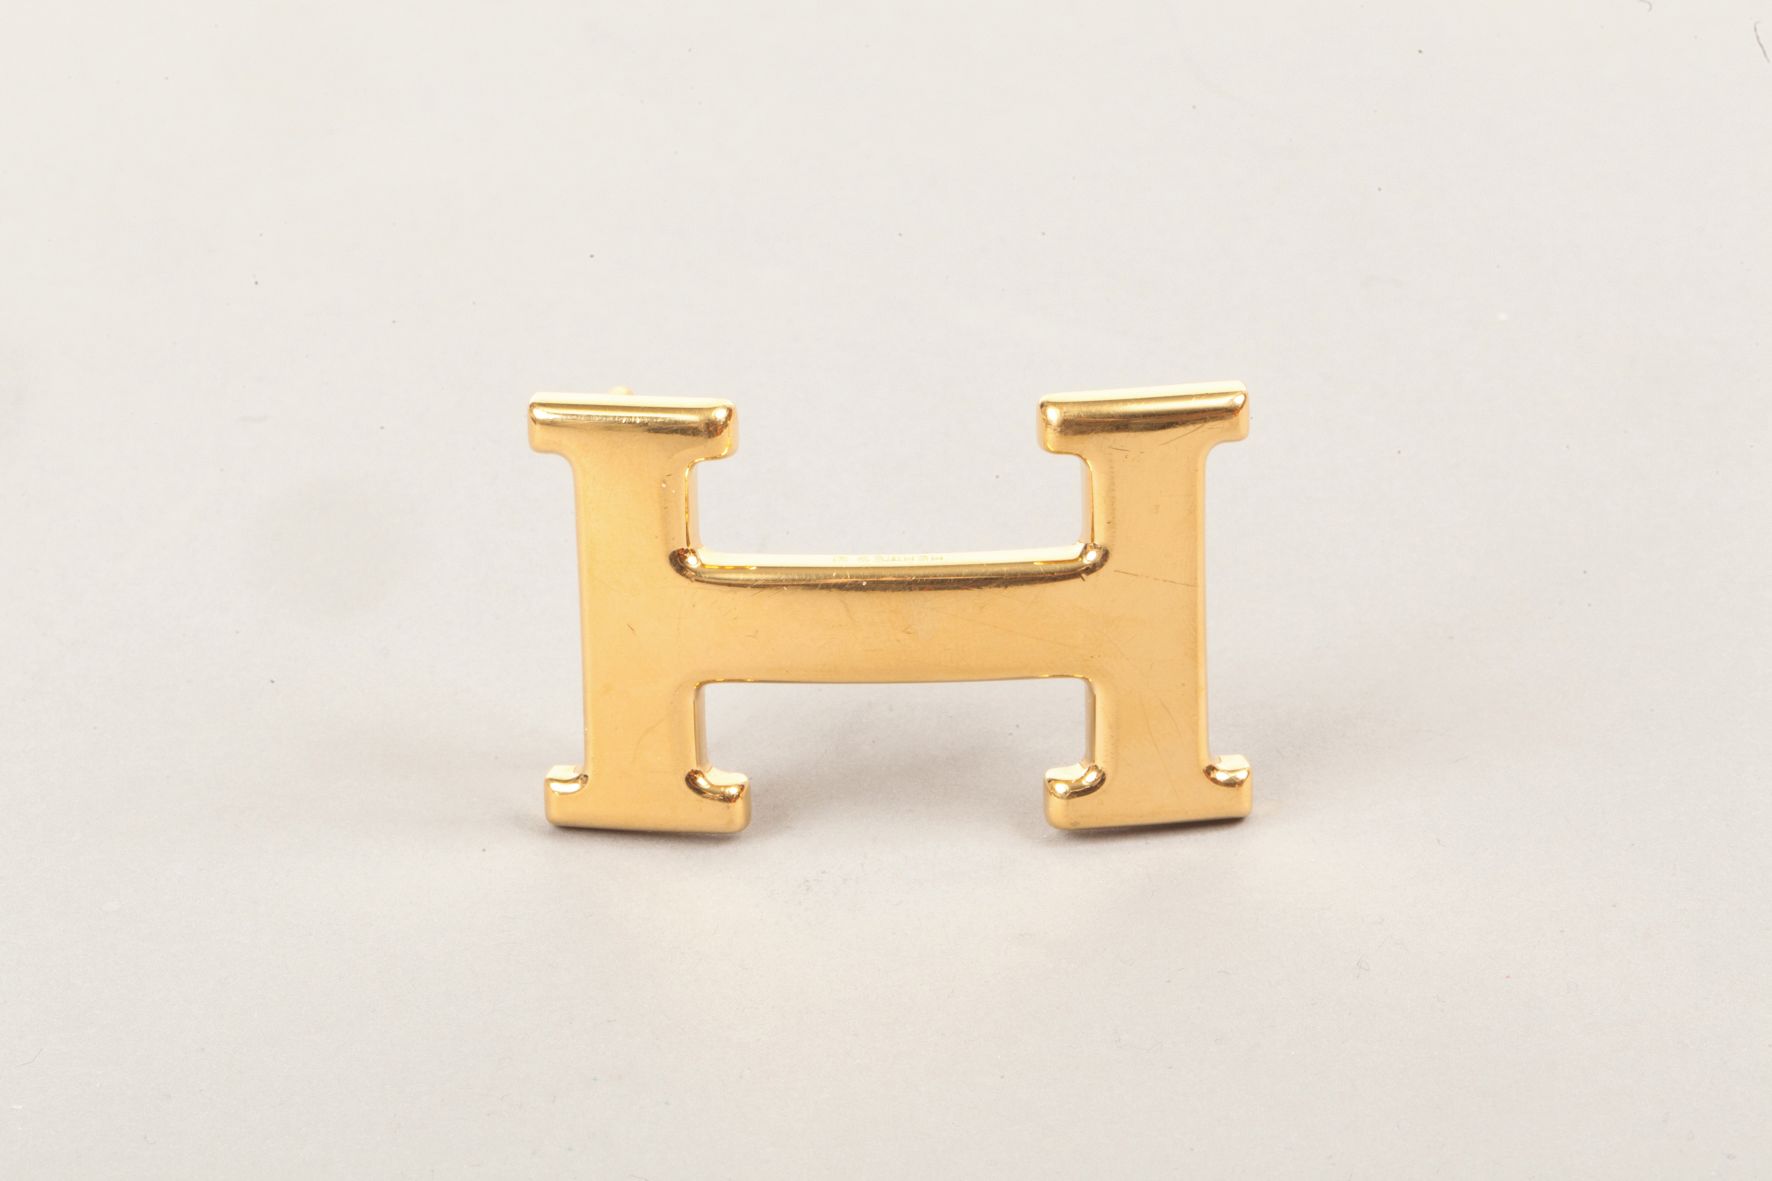 Null *HERMES Paris - "Constance" buckle 32mm in gilded metal. (Scratches).